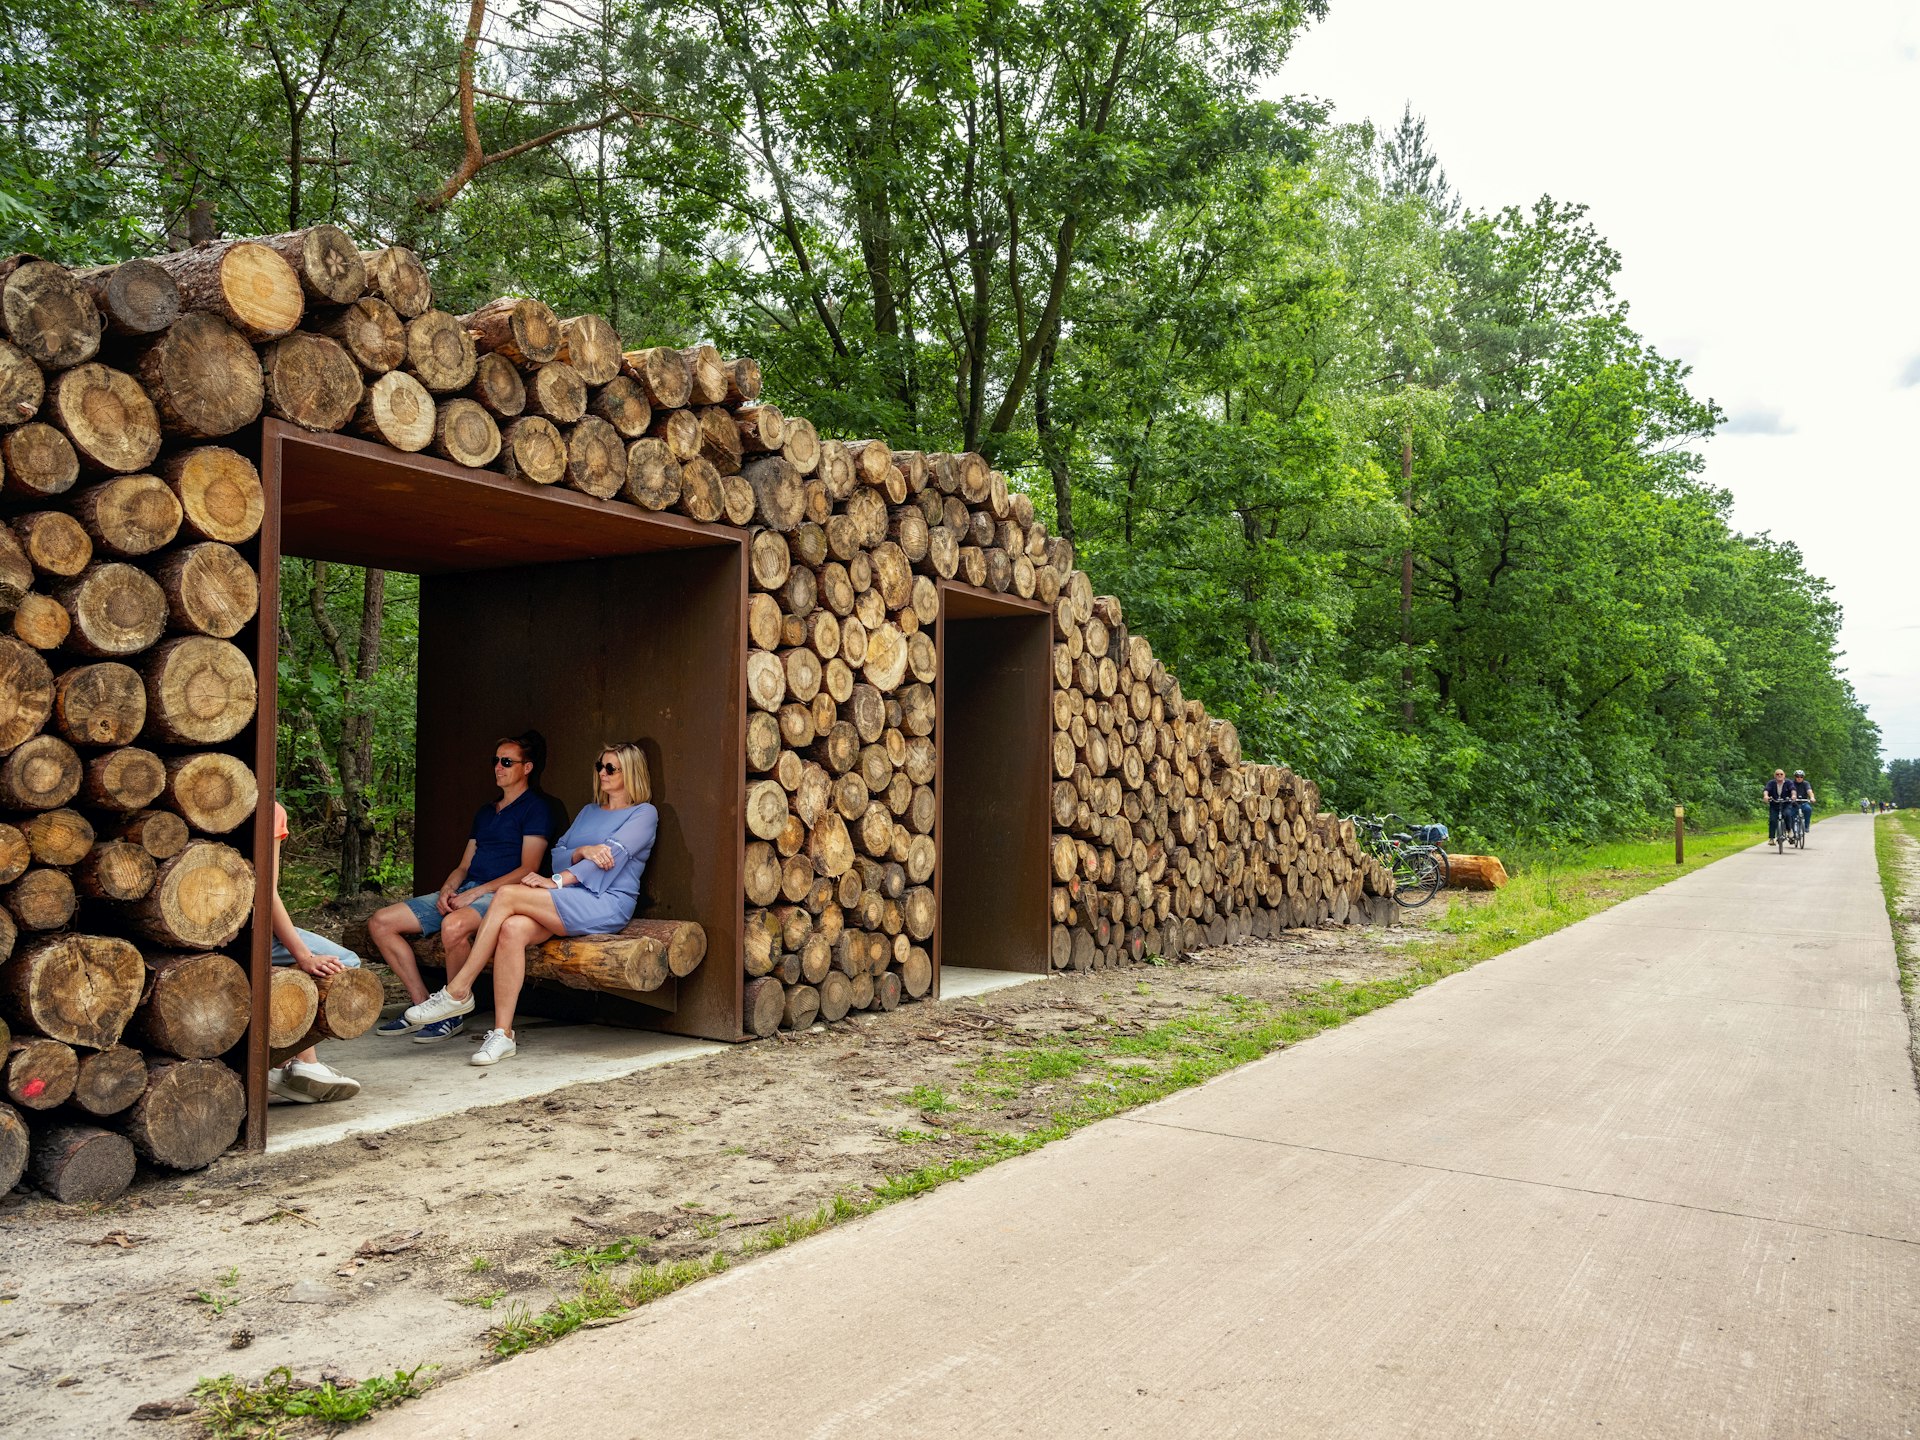 A resting spot on a cycle trail made from recycled tree trunks